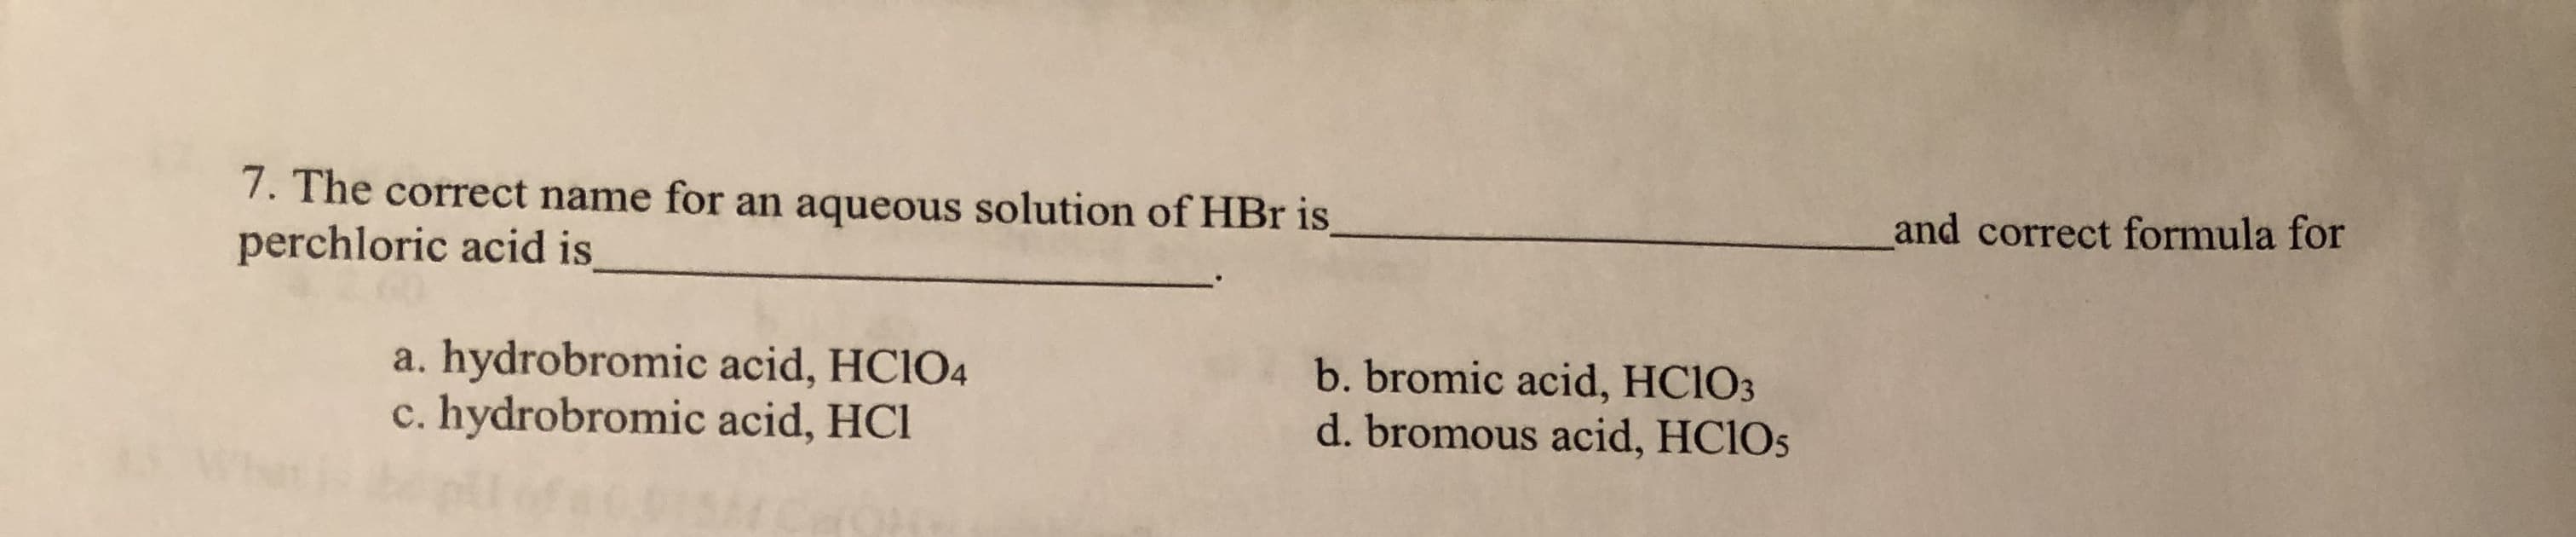 7. The correct name for an aqueous solution of HBr is
and correct formula for
perchloric acid is
a. hydrobromic acid, HCIO4
c. hydrobromic acid, HCl
b. bromic acid, HCIO3
d. bromous acid, HCIOS
